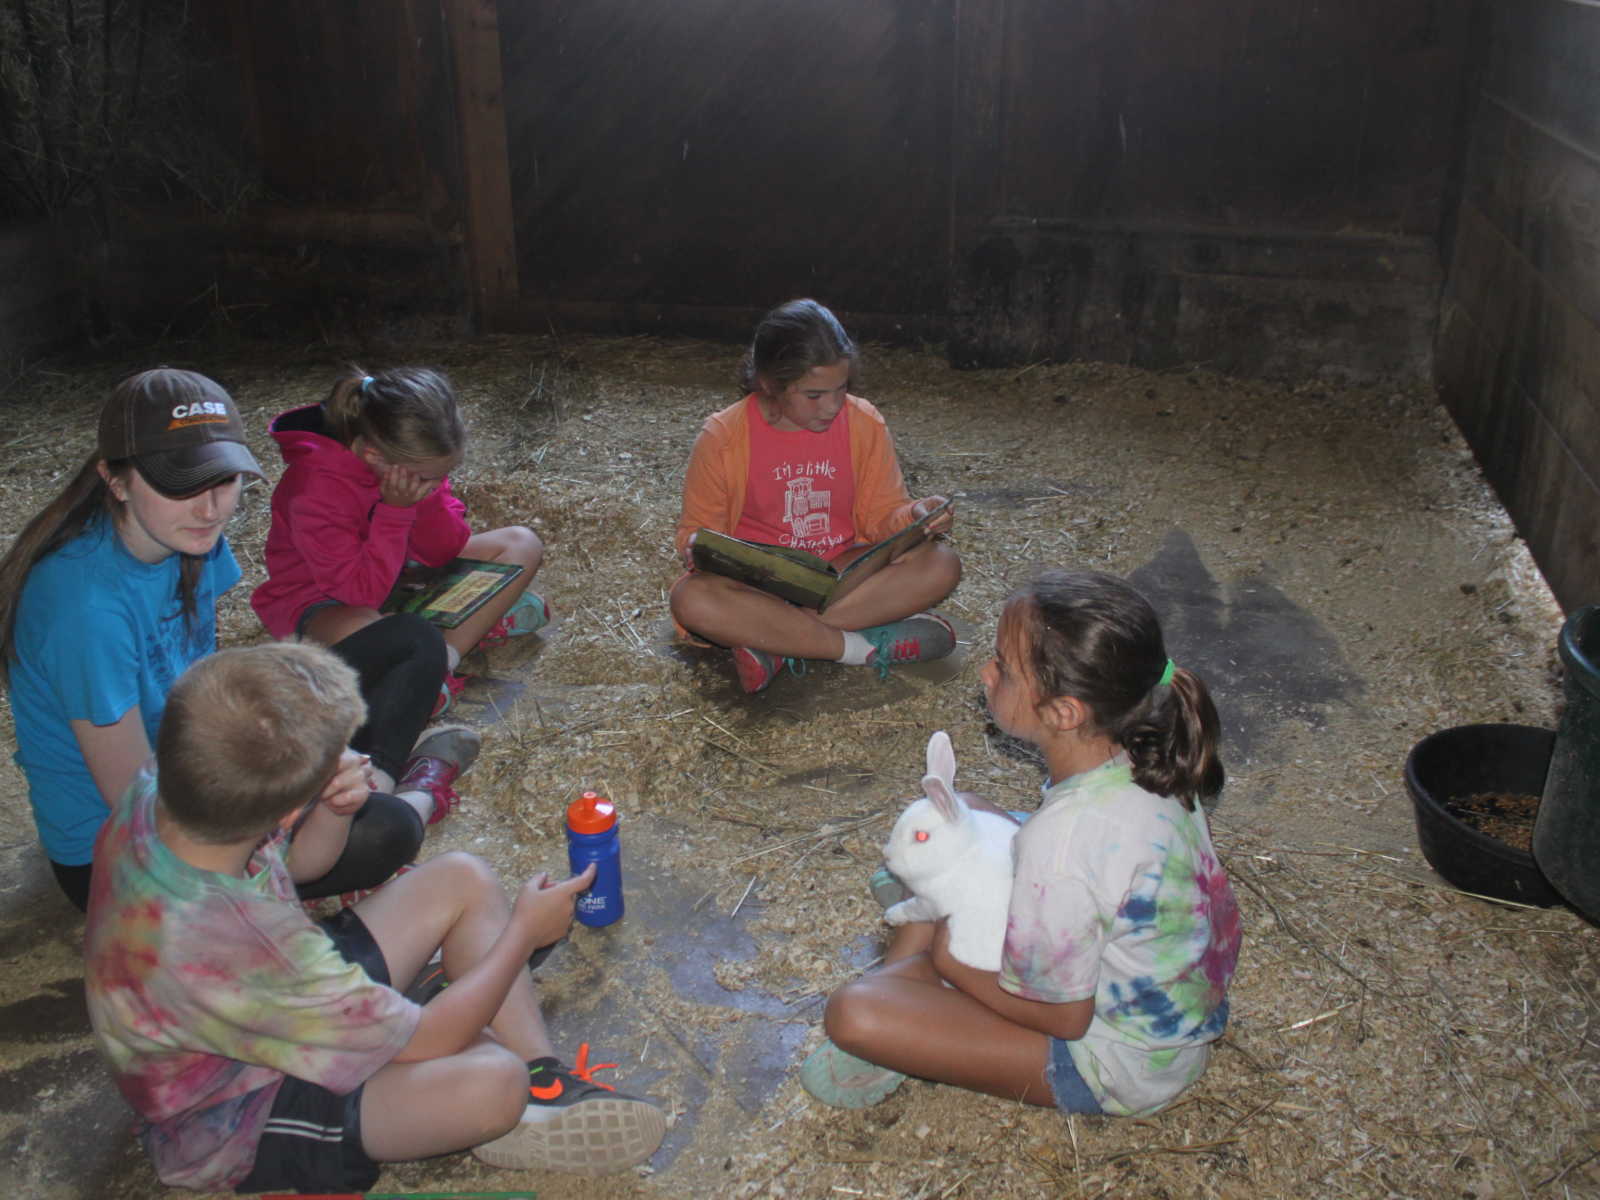 kids sitting in barn with teenager in a circle while on girl has white bunny in lap and two girls have books